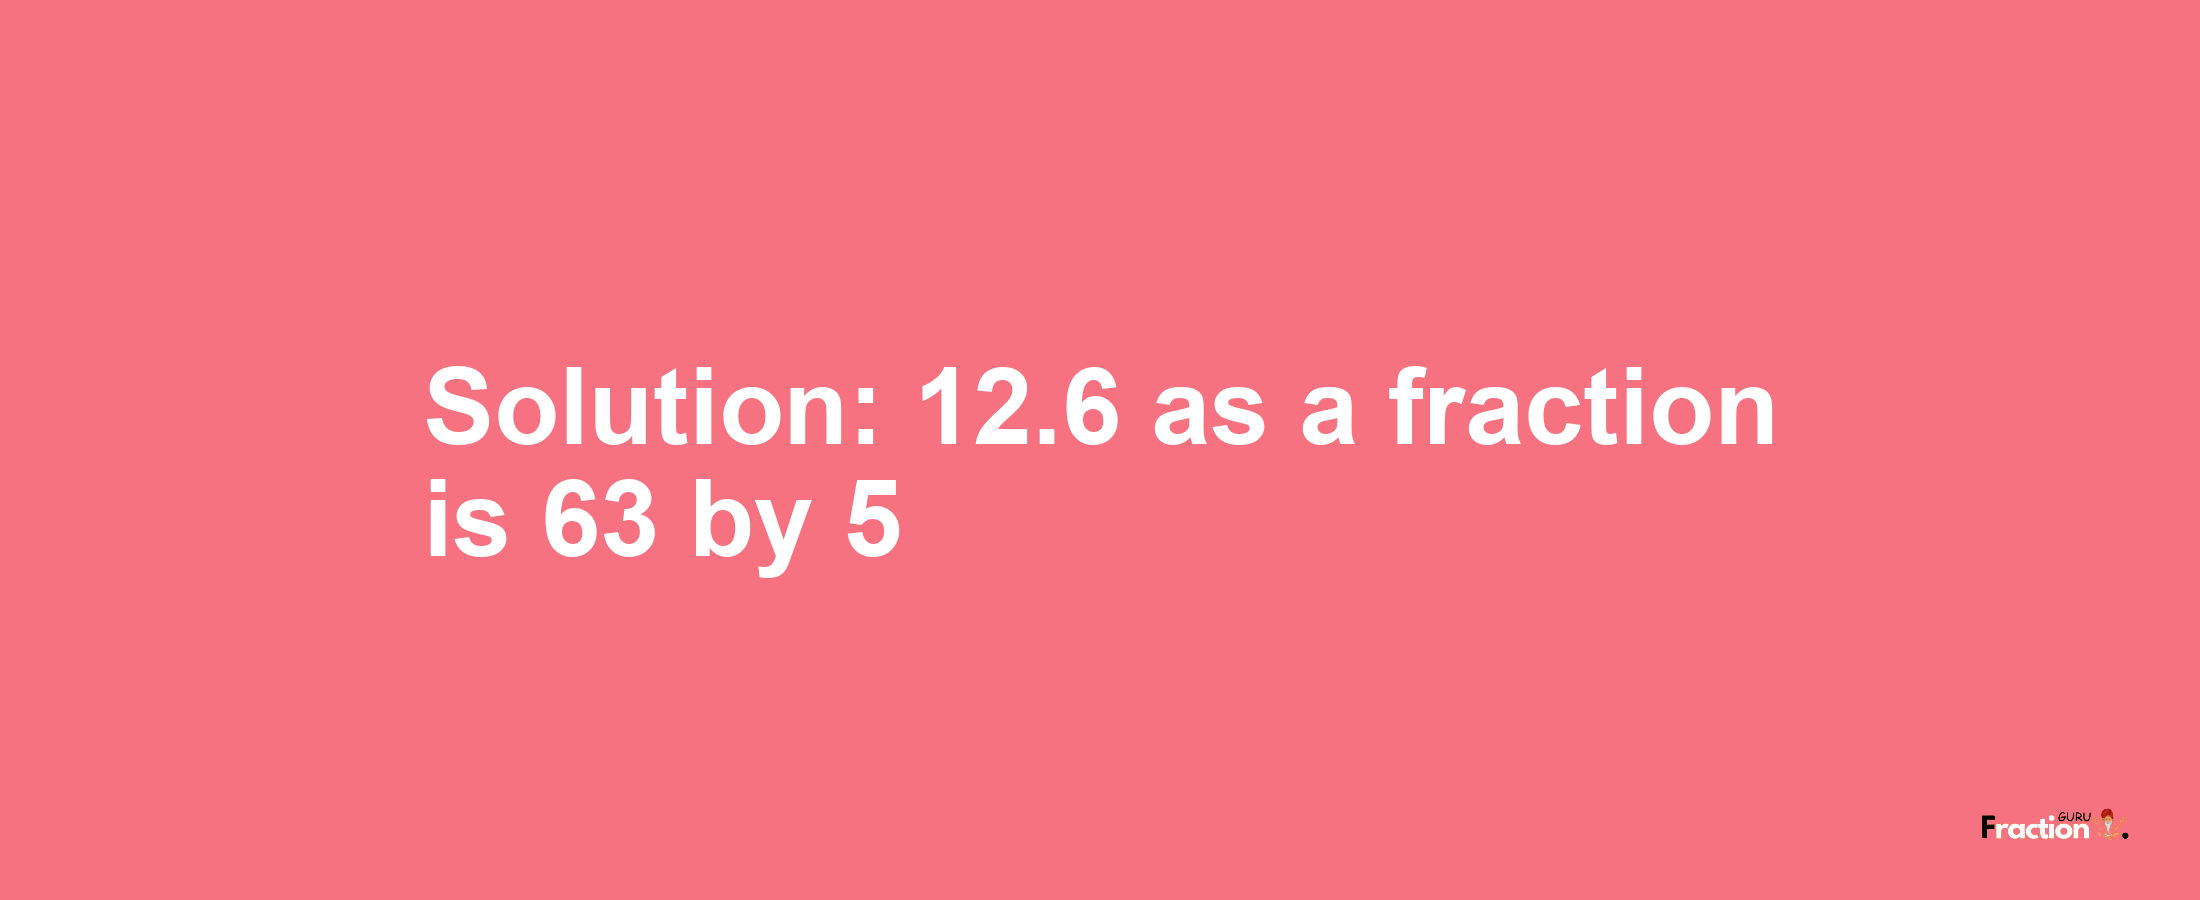 Solution:12.6 as a fraction is 63/5